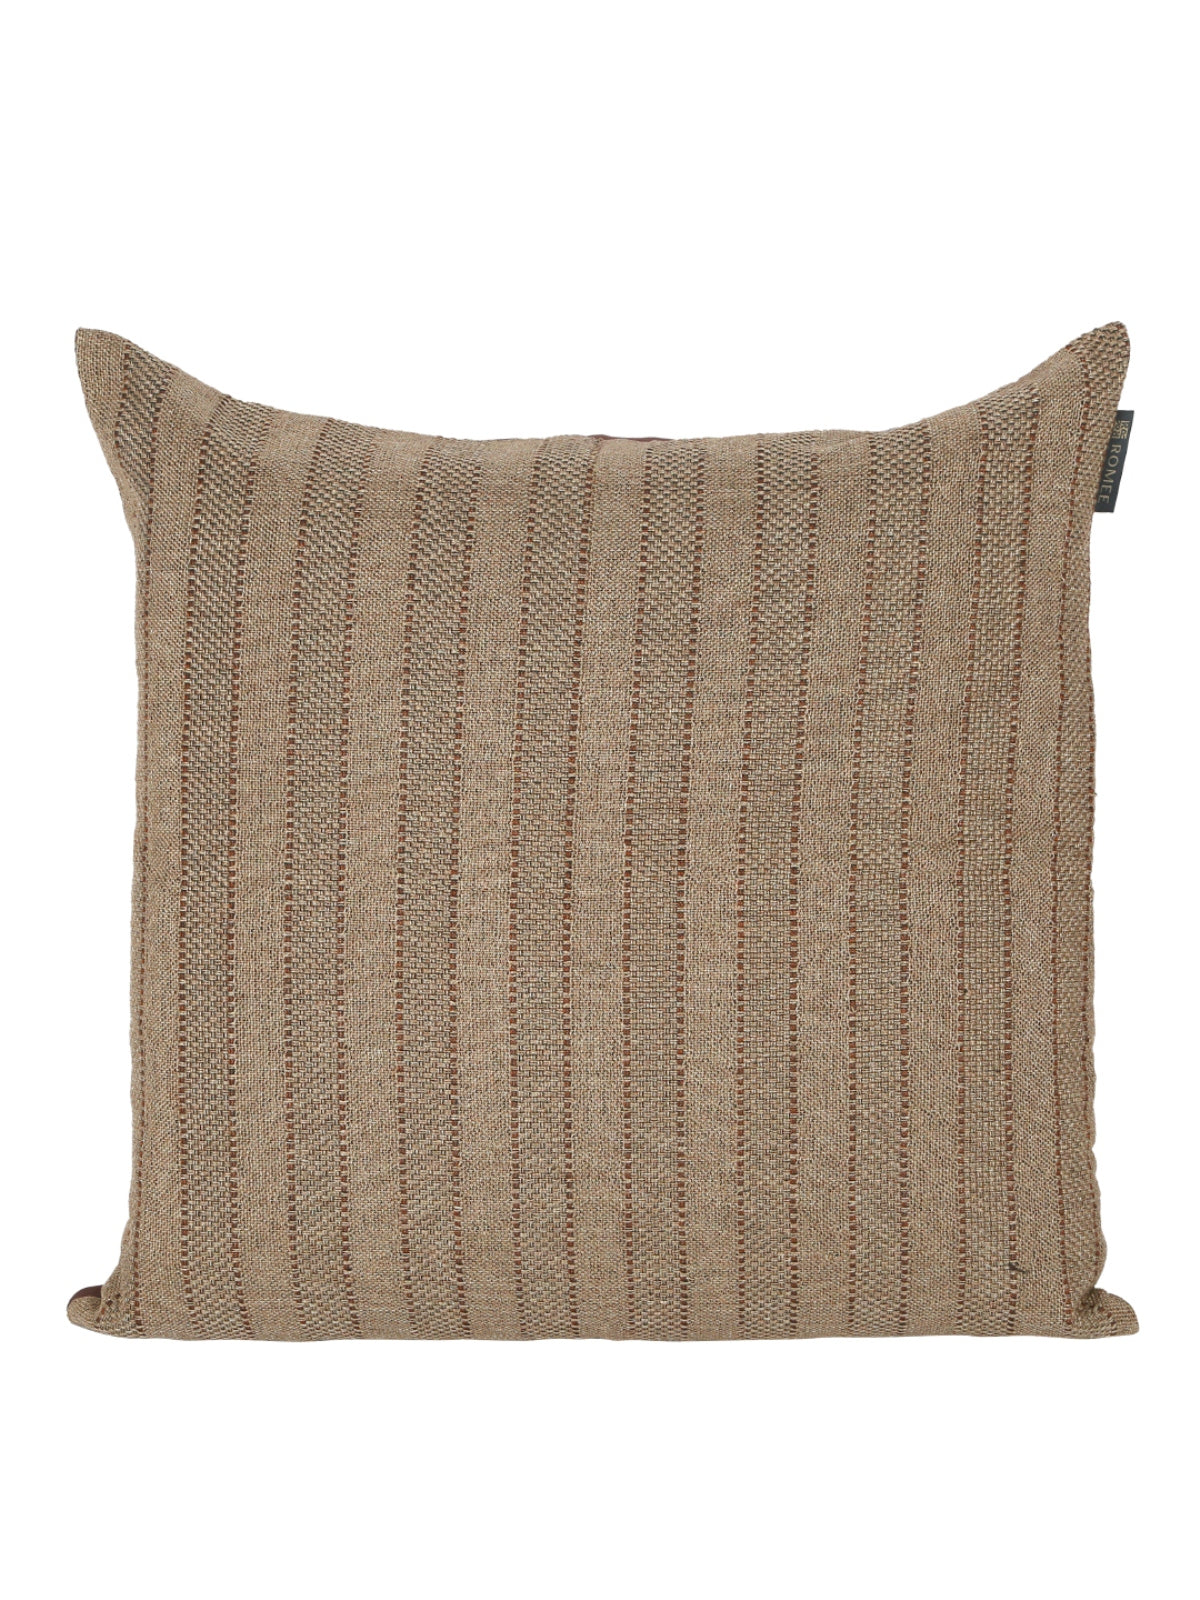 Brown and Beige Set of 2 Cushion Covers 24x24 Inch